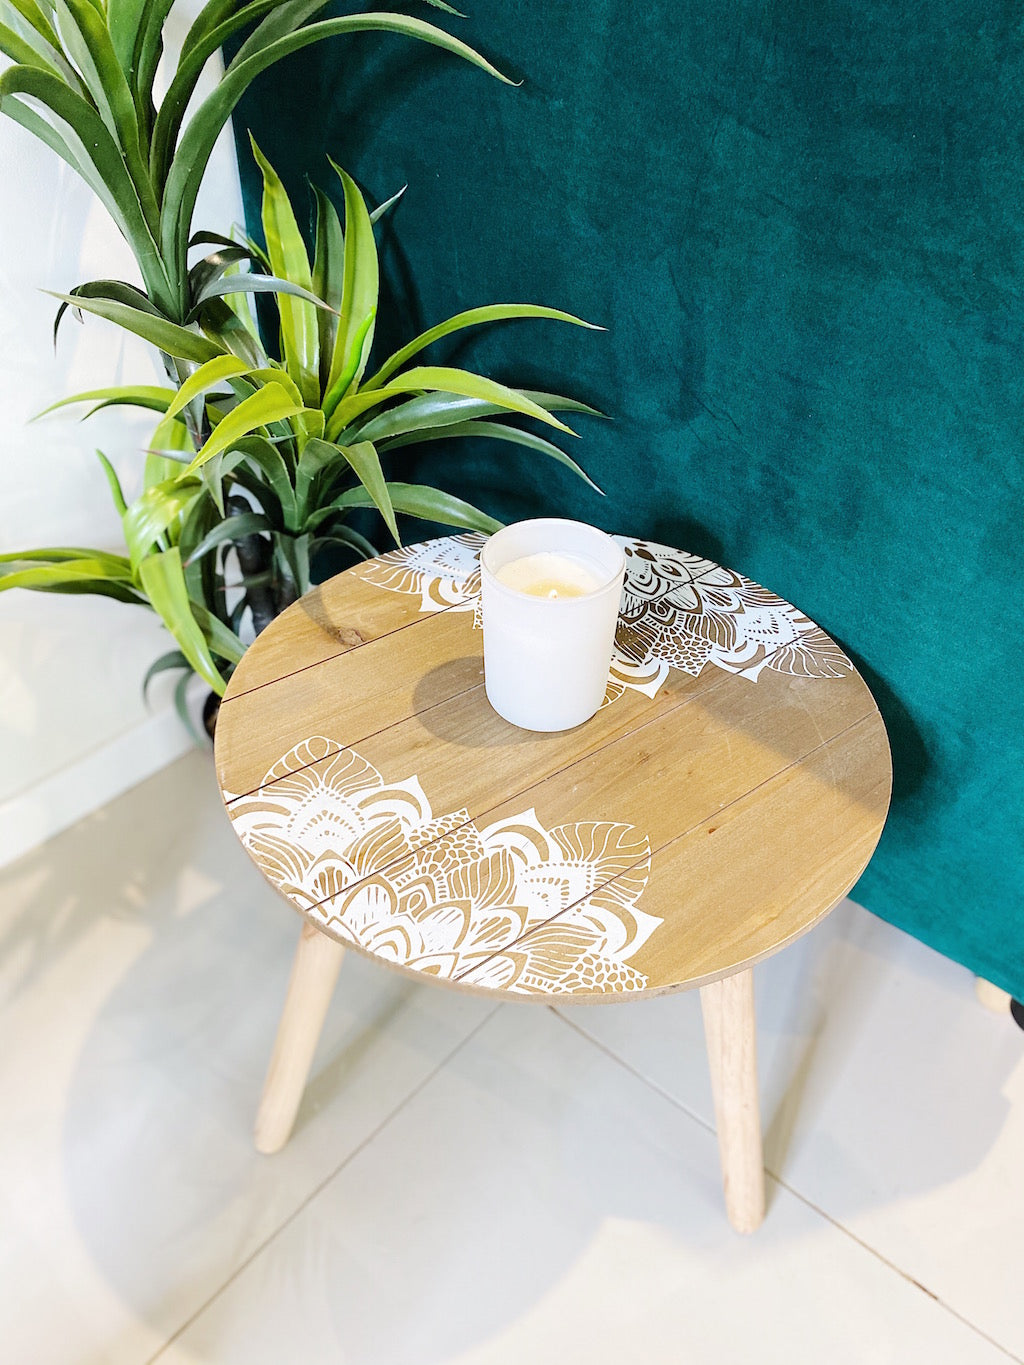 White Mandala Print Side Table - Perfect as a bedside table, coffee table or as corner decor table - Features a beautiful White Mandala design - Made from MDF - Measures: 40x40cm. |Bliss Gifts & Homewares - Unit 8, 259 Princes Hwy Ulladulla - Shop Online & In store - 0427795959, 44541523 - Australia wide shipping